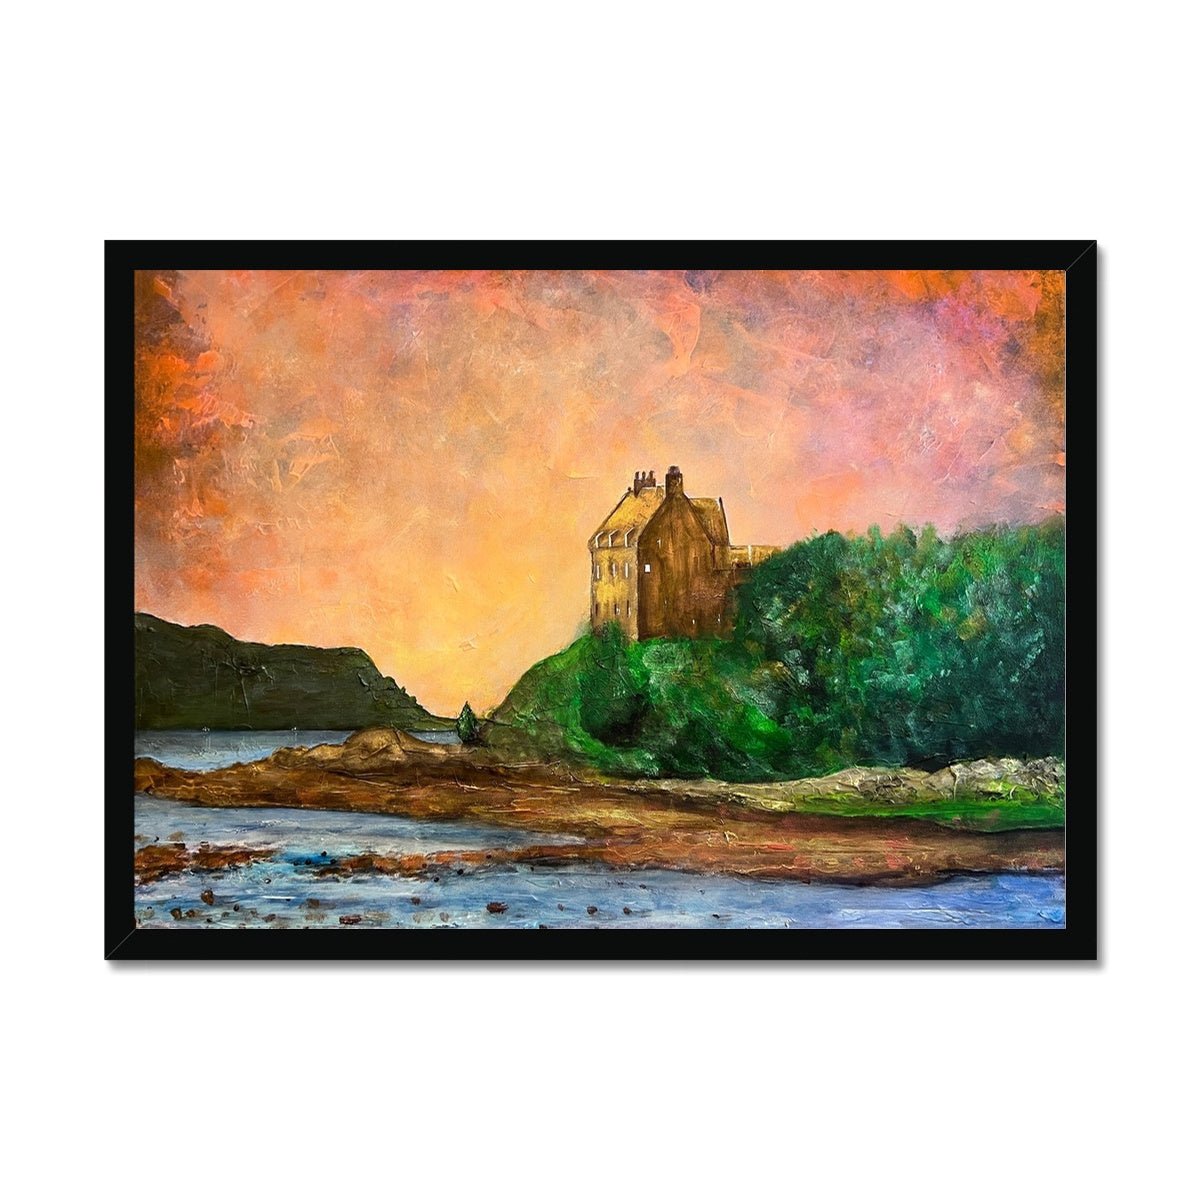 Duntrune Castle Painting | Framed Prints From Scotland-Framed Prints-Historic & Iconic Scotland Art Gallery-A2 Landscape-Black Frame-Paintings, Prints, Homeware, Art Gifts From Scotland By Scottish Artist Kevin Hunter